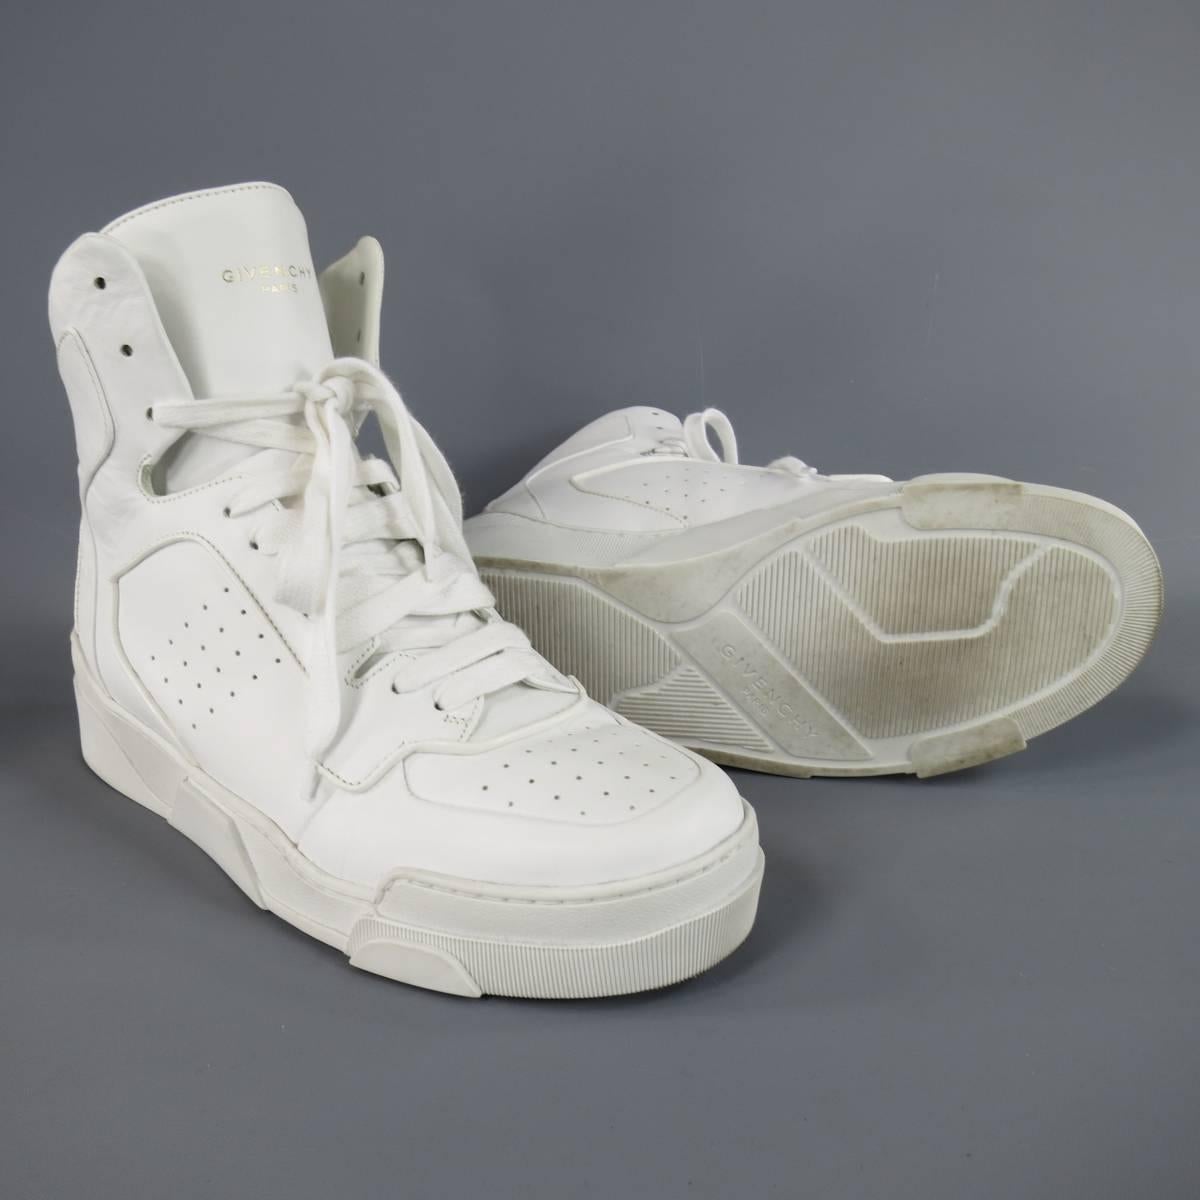 GIVENCHY "TYSON II" high top sneakers come in a smooth white leather in an Air Force 1 inspired design with a perforated toe box, structural midsole, high tongue with gold flake logo, and ribbed back with tab. Minor wear. Made in